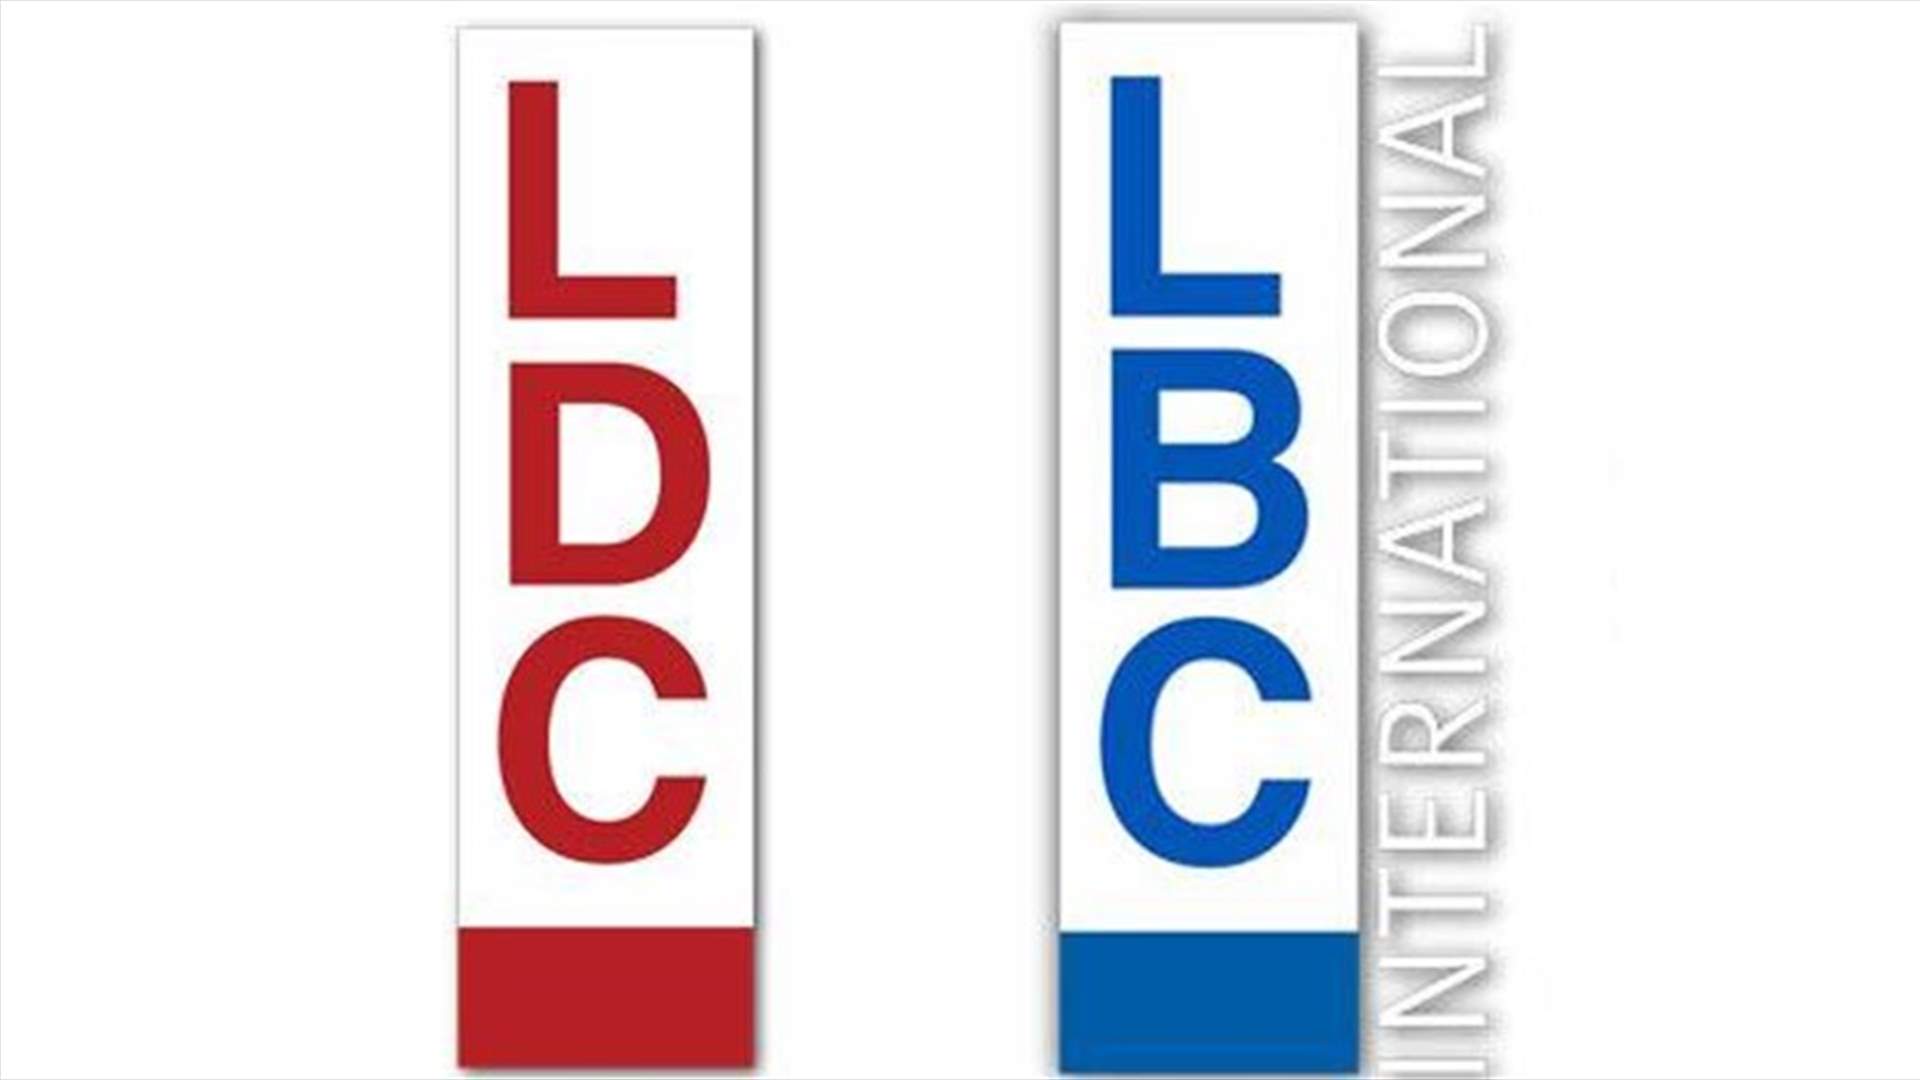 Two frequencies for LDC on Nilesat transponder